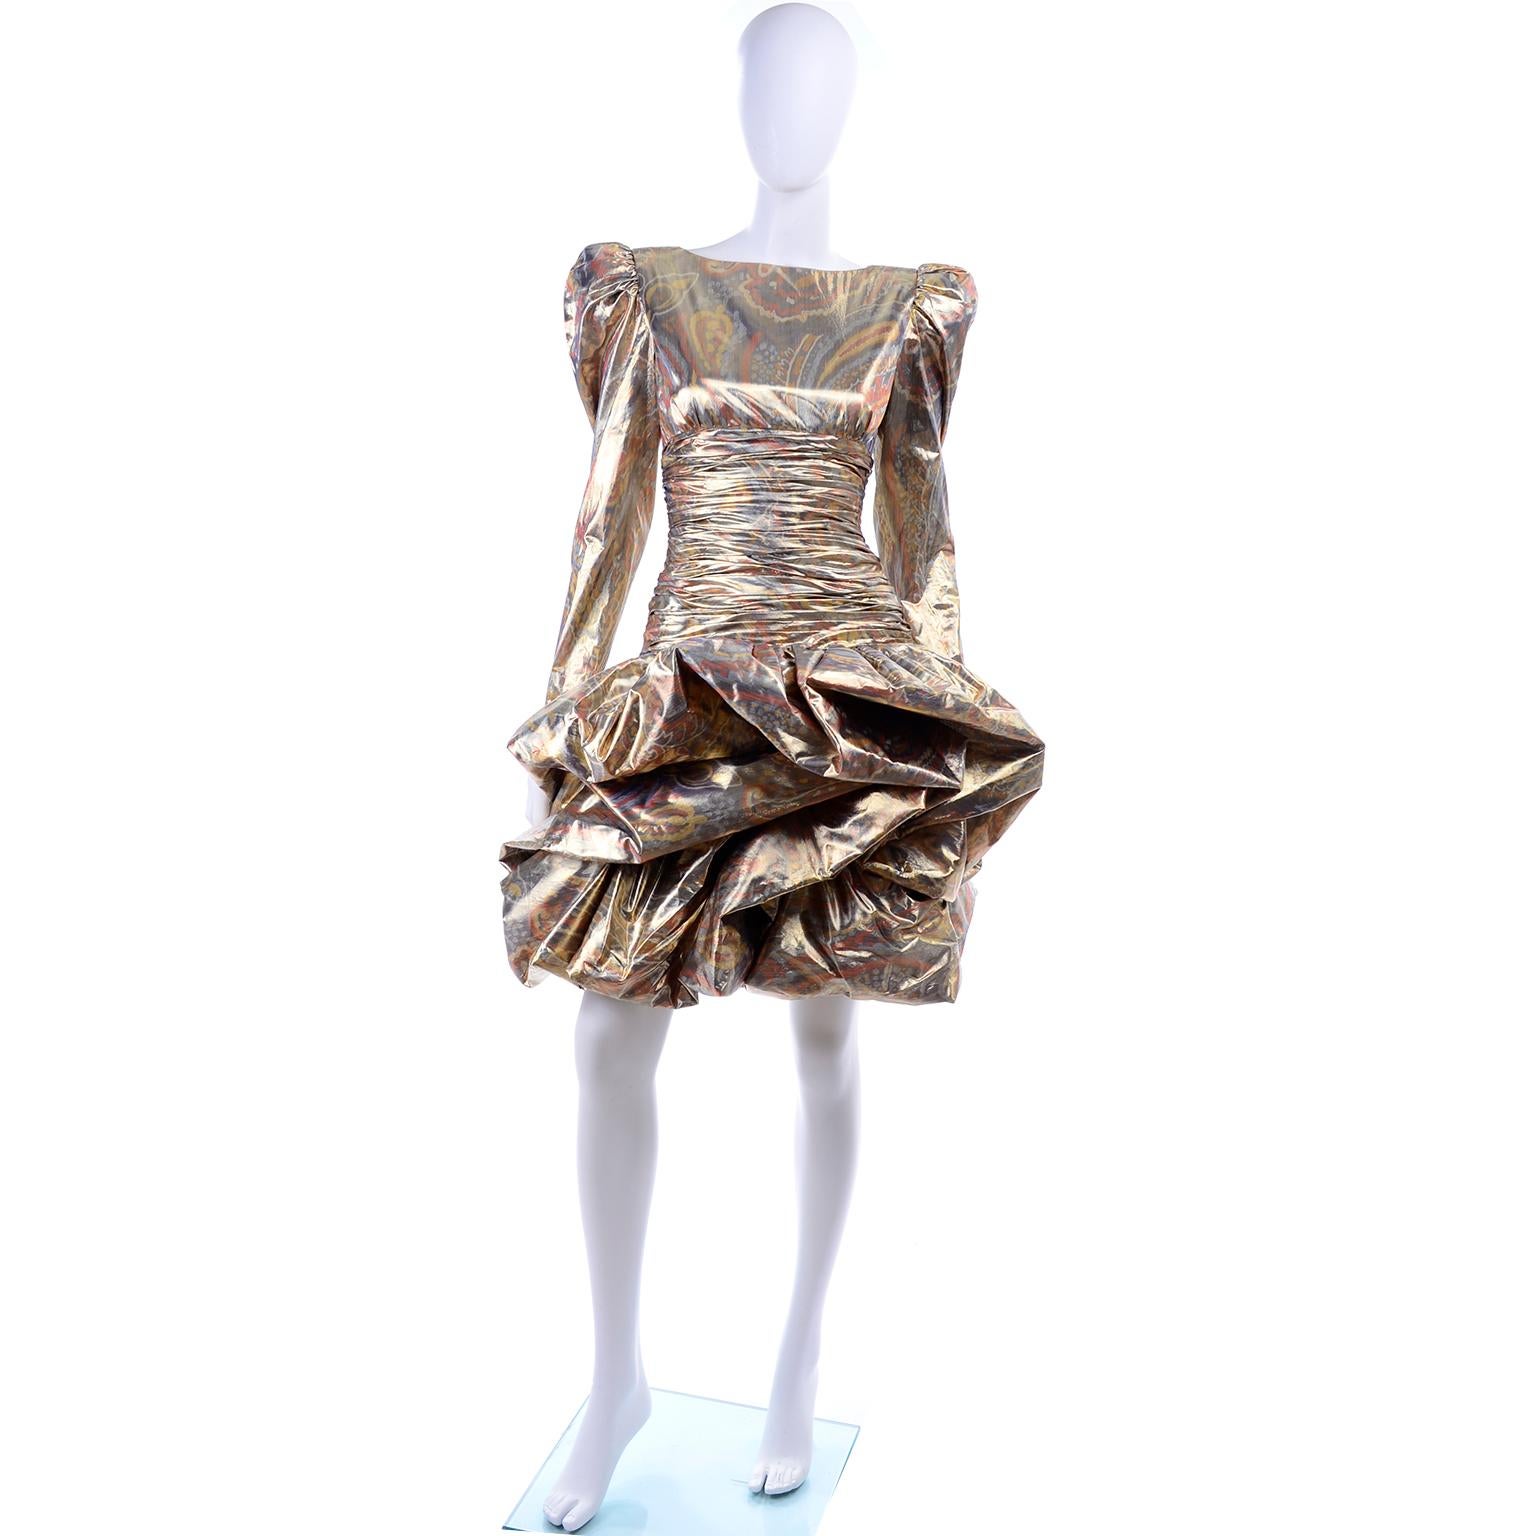 This sensational vintage dress from the 1980's is made in an exquisite lame fabric in shades of copper, gold, bronze and silver in an abstract paisley pattern.  This dramatic dress has gathered shoulders with shoulder pads, a wide ruched waist, and